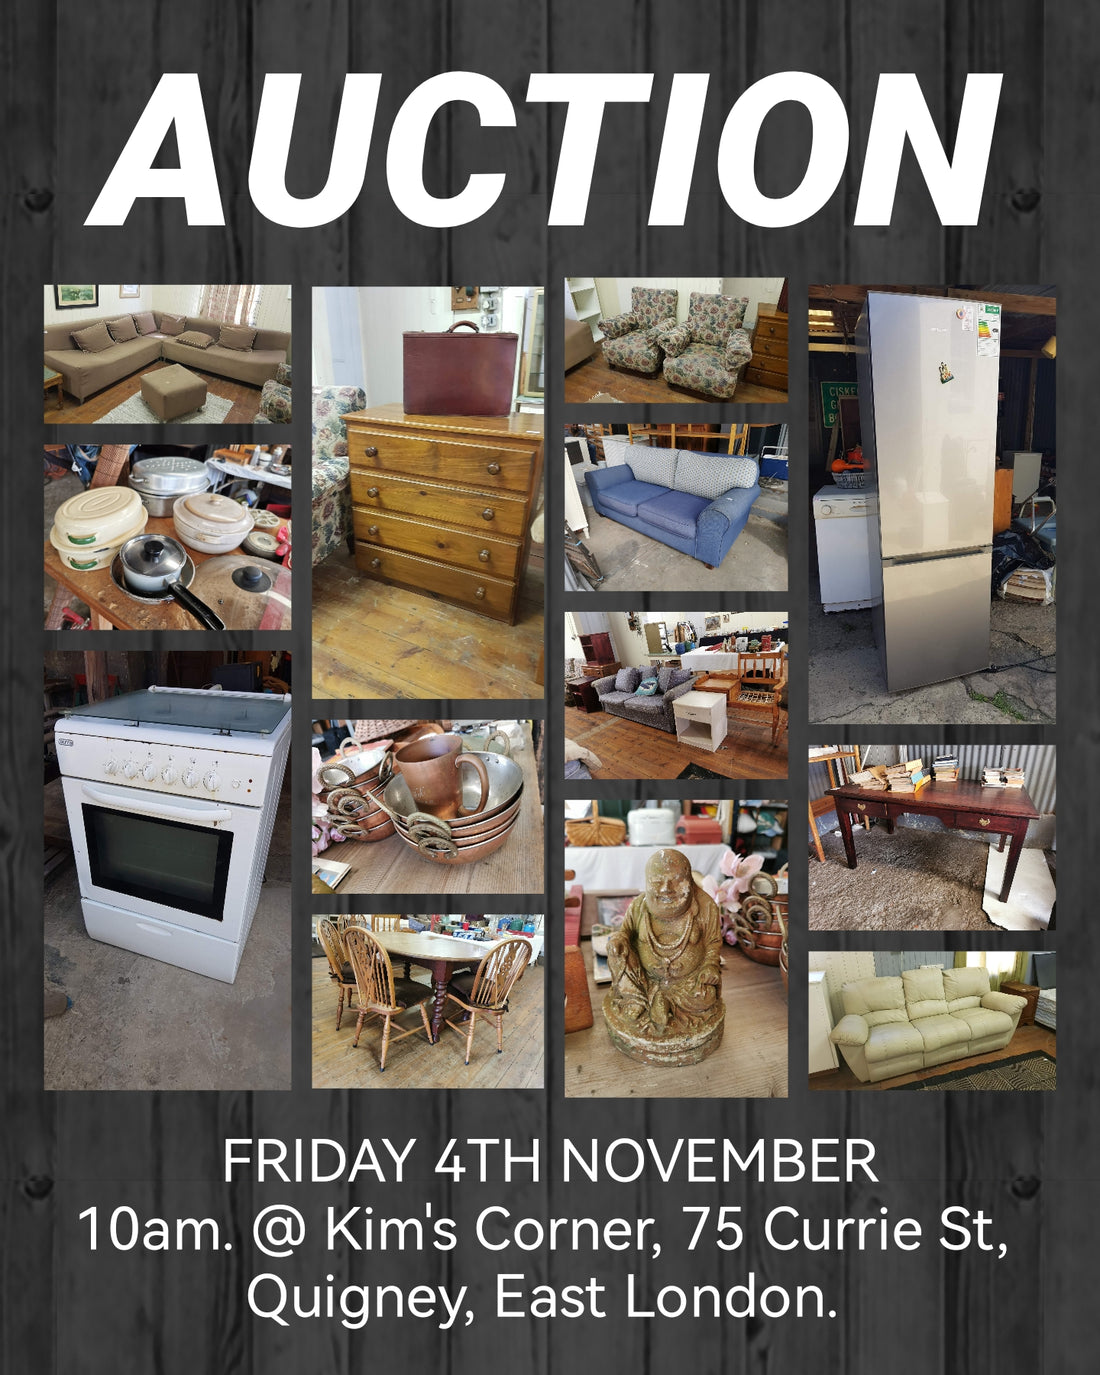 AUCTION this FRIDAY 4th November